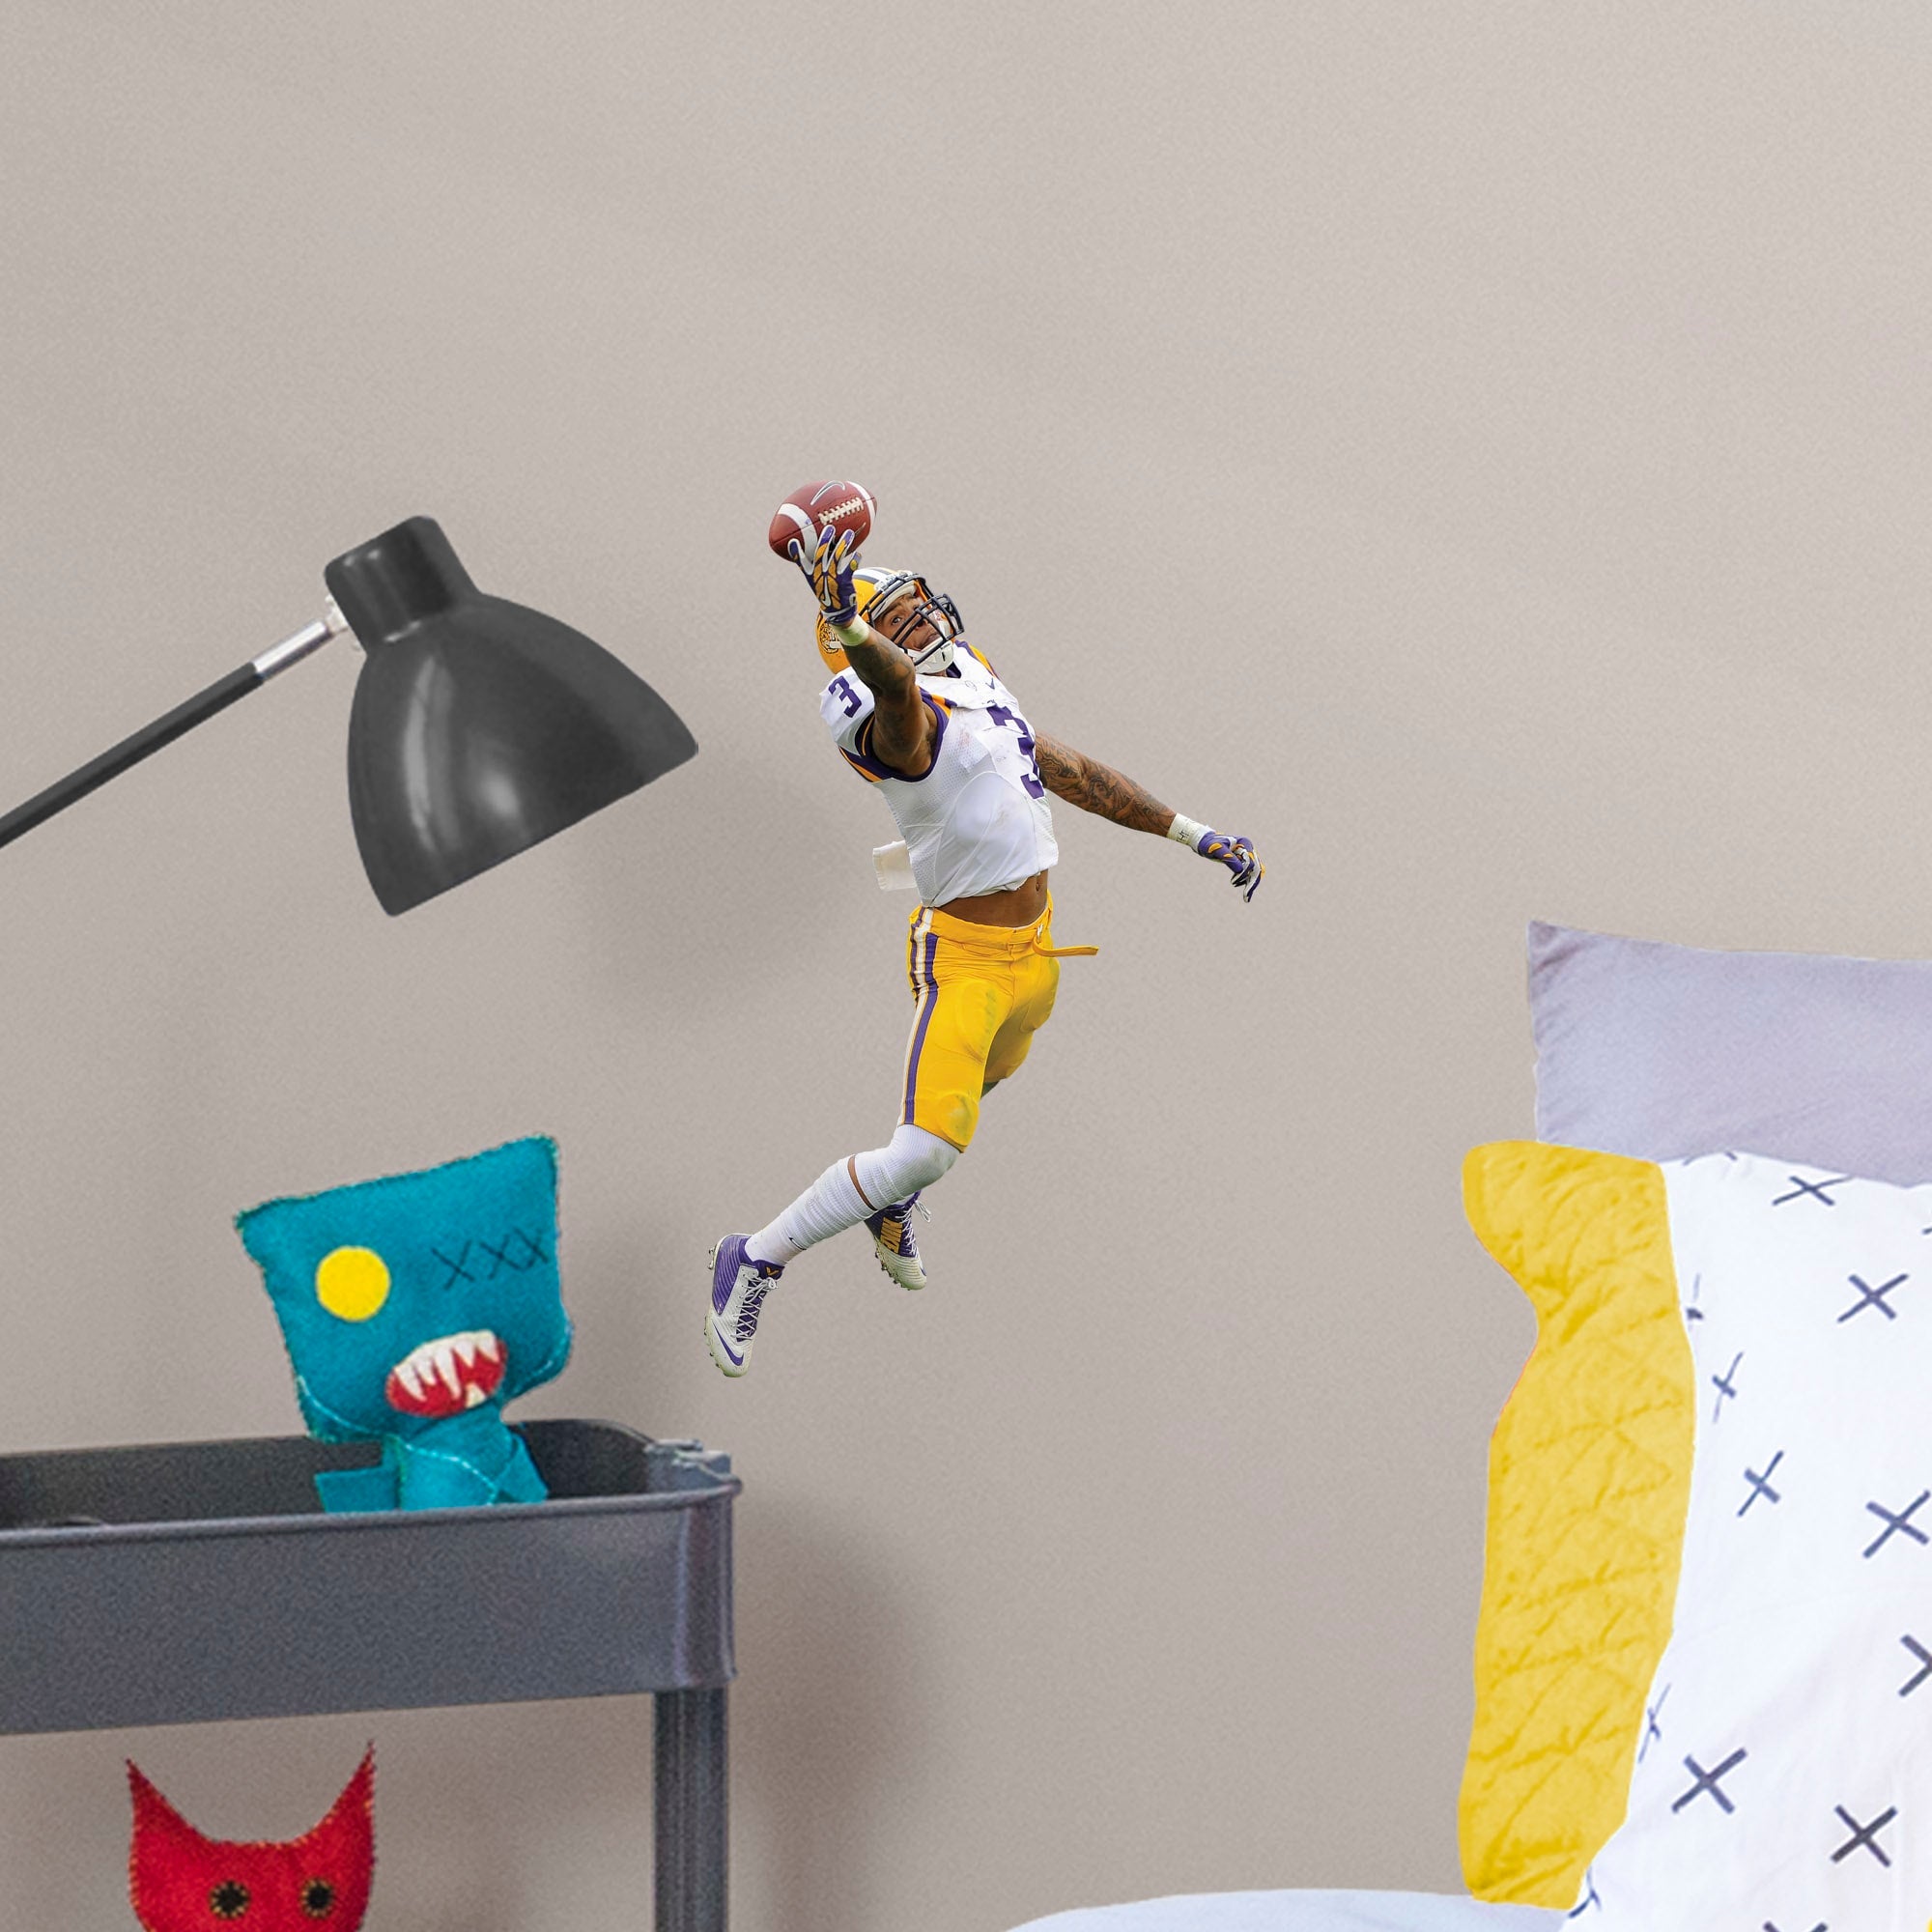 Odell Beckham Jr. for LSU Tigers: LSU - Officially Licensed Removable Wall Decal Large by Fathead | Vinyl